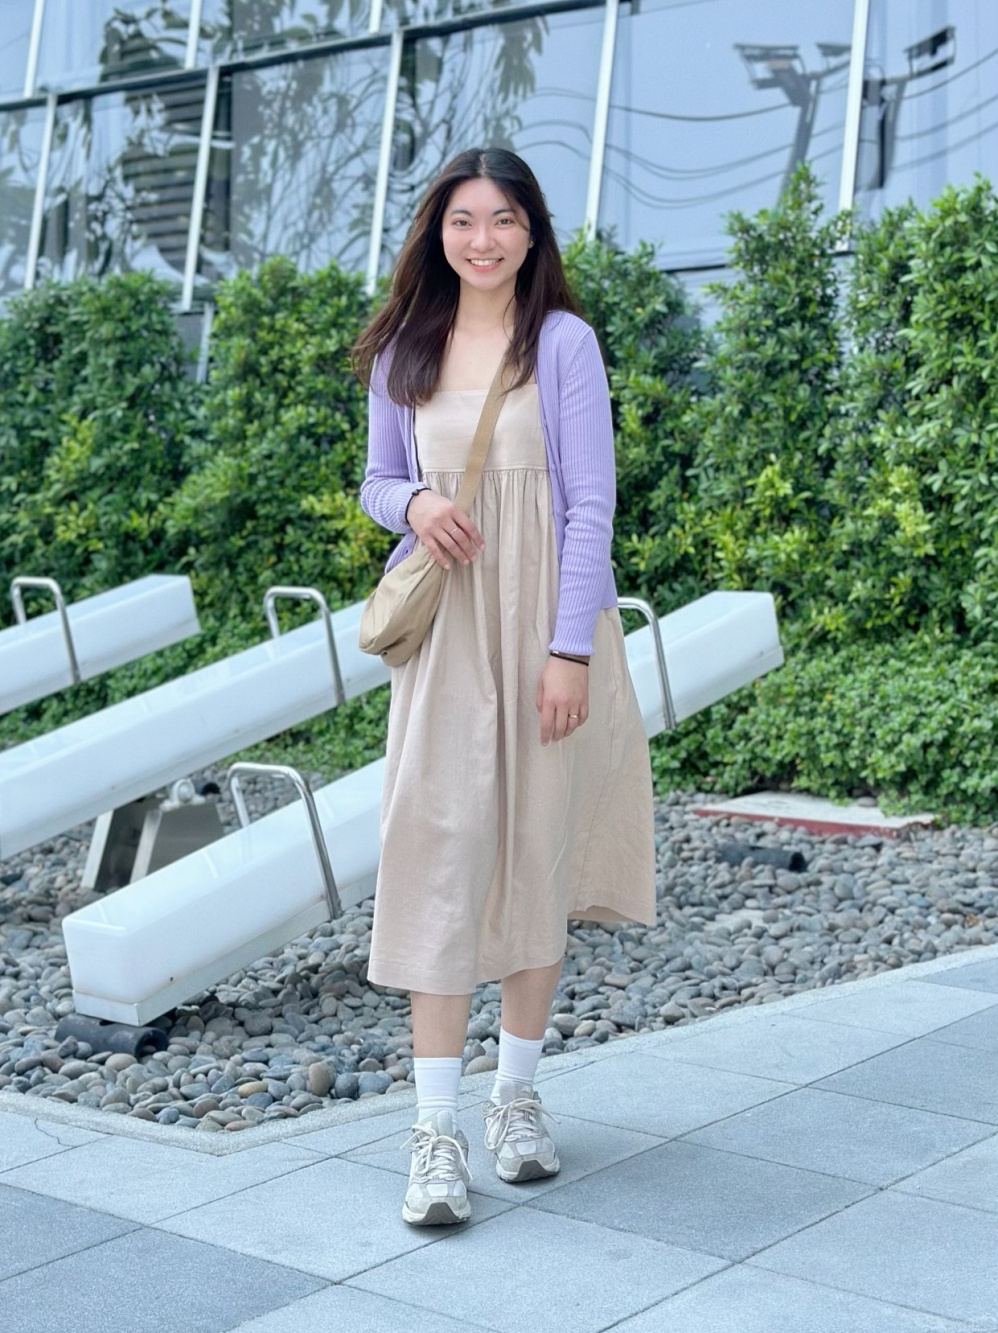 Shop looks for「Linen Blend Gathered Camisole Dress」